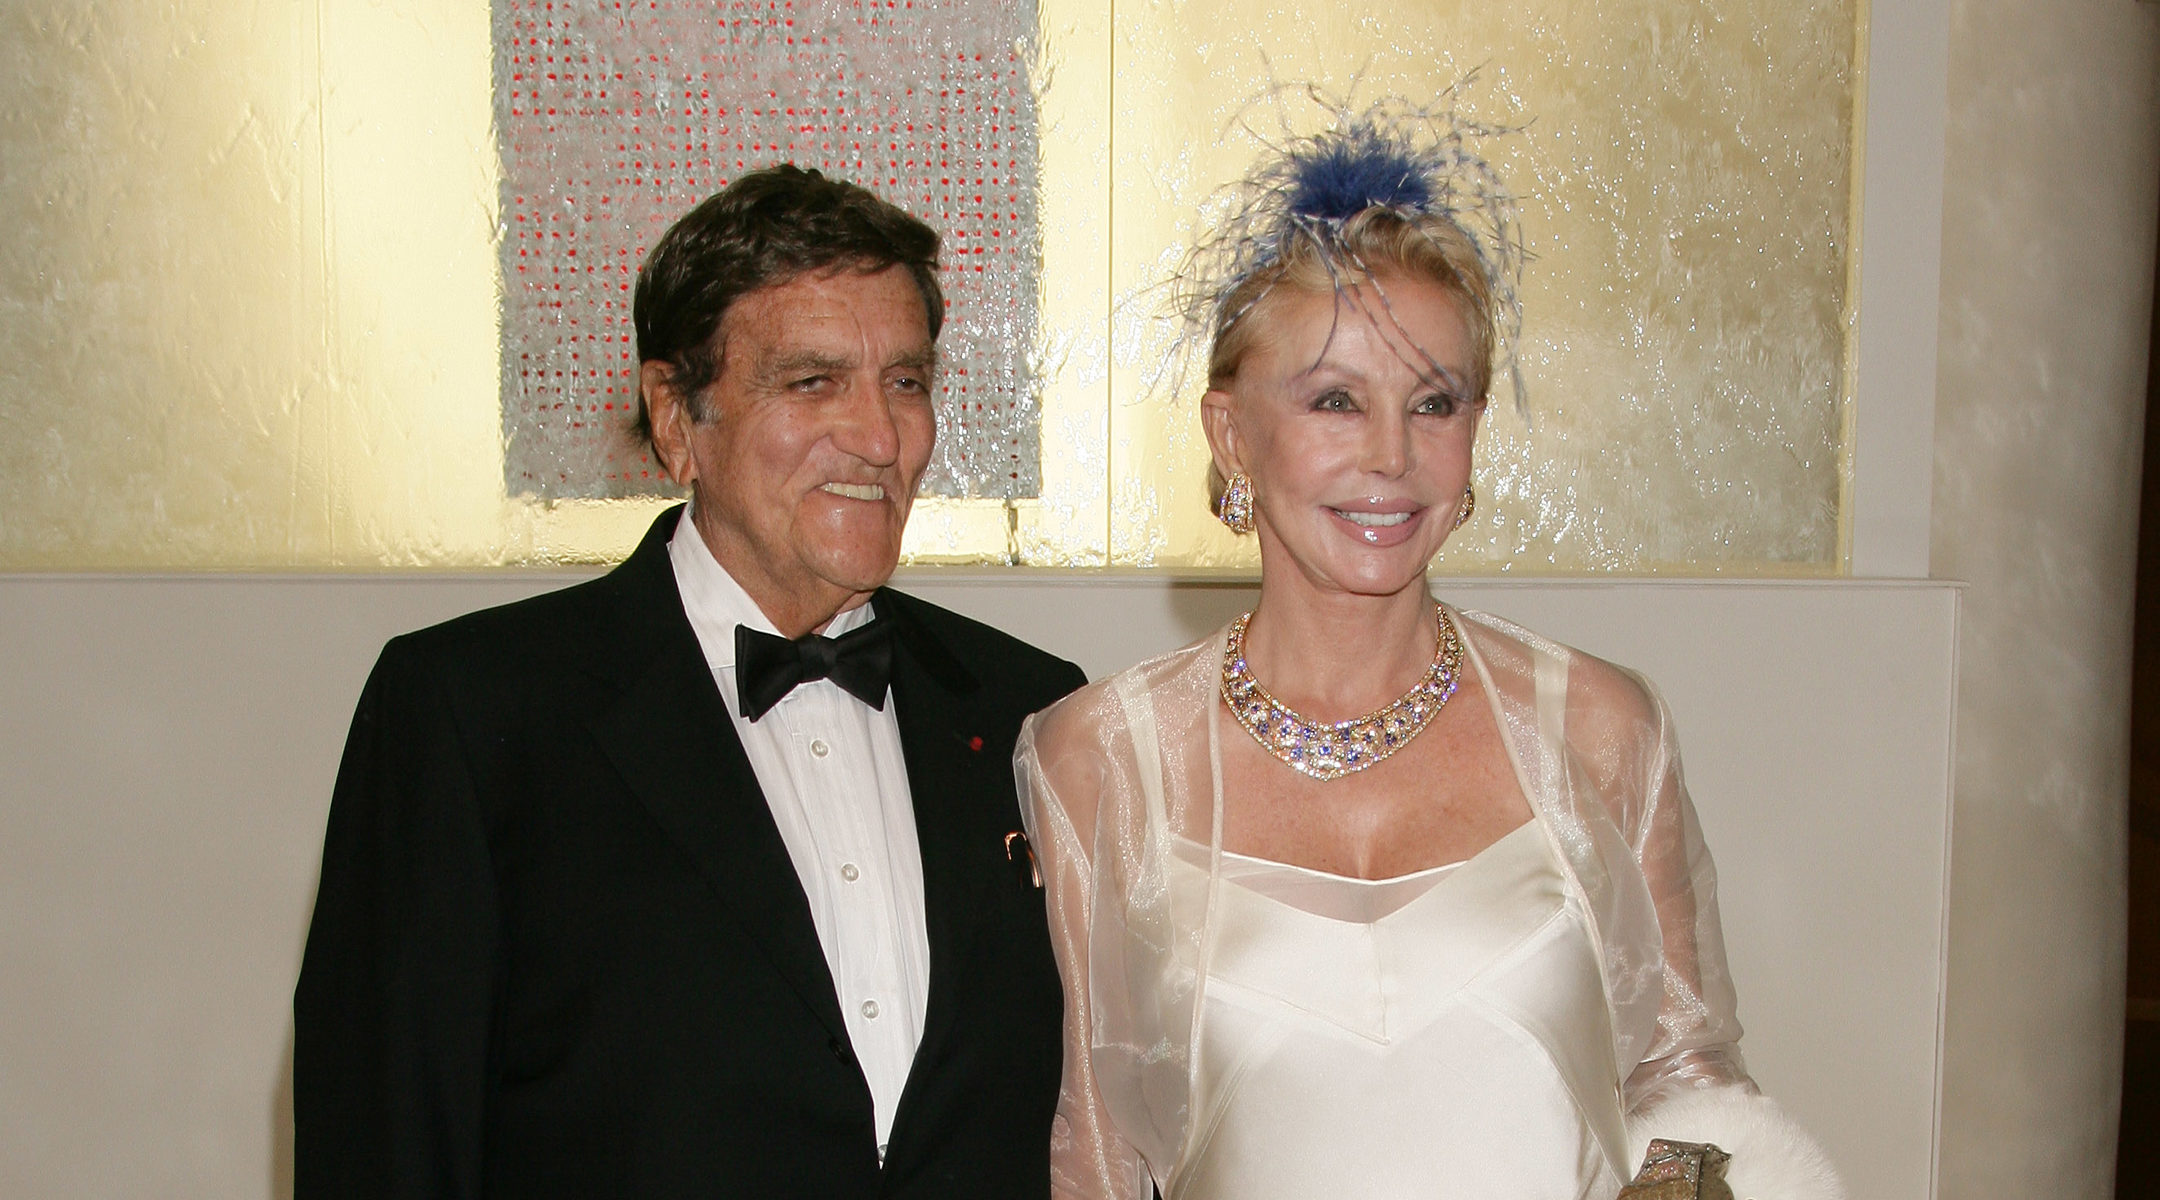 Tony Murray and Baronne Von Brandstetter attending the 57th Red Cross Ball on August 5, 2005 in Monaco. (Stephane Cardinale/Corbis via Getty Images)